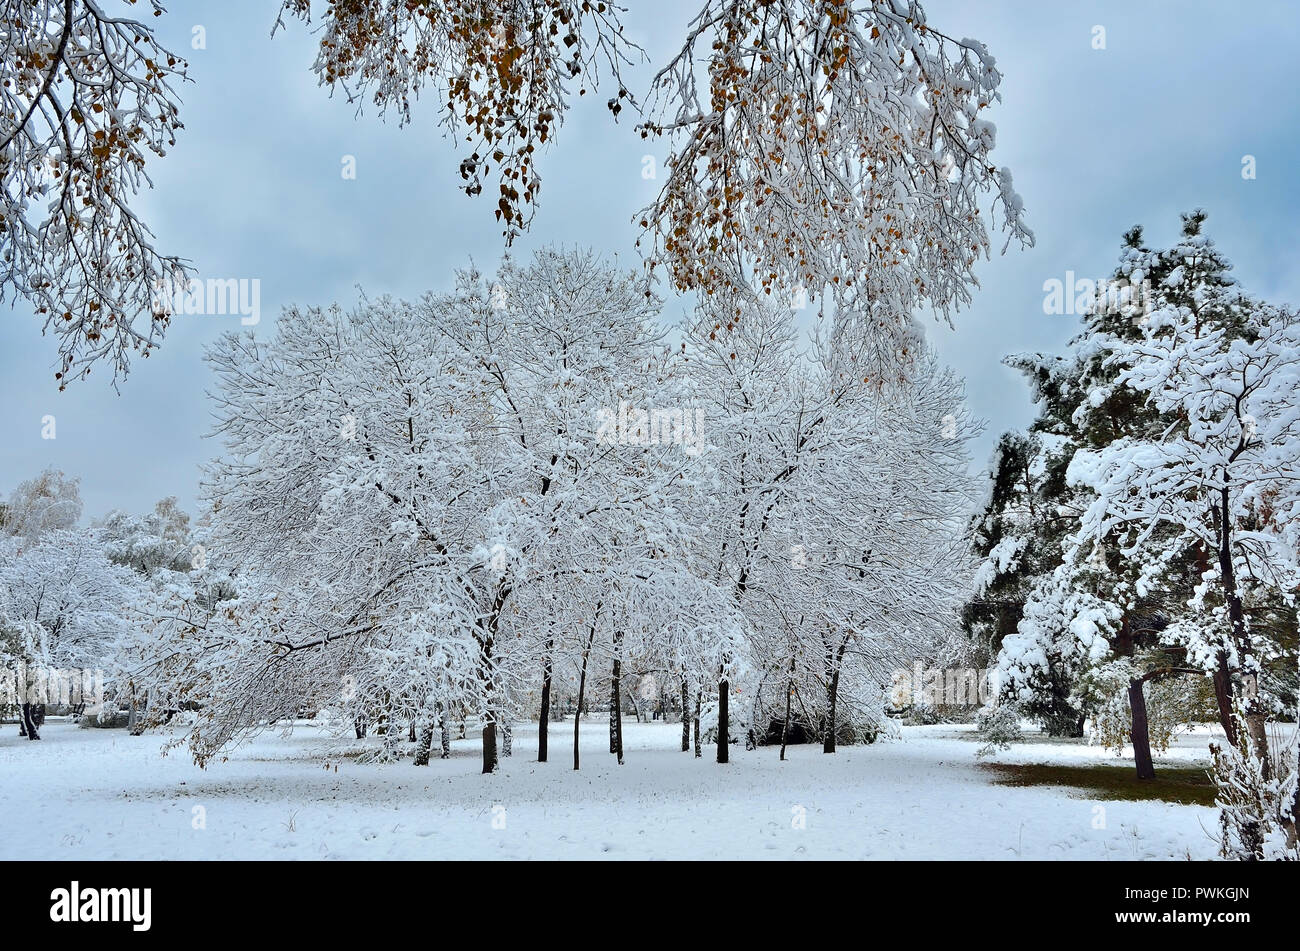 Autumn city park under first fluffy snow. Winter landscape. Tree branches with snow covered foliage at foreground Stock Photo